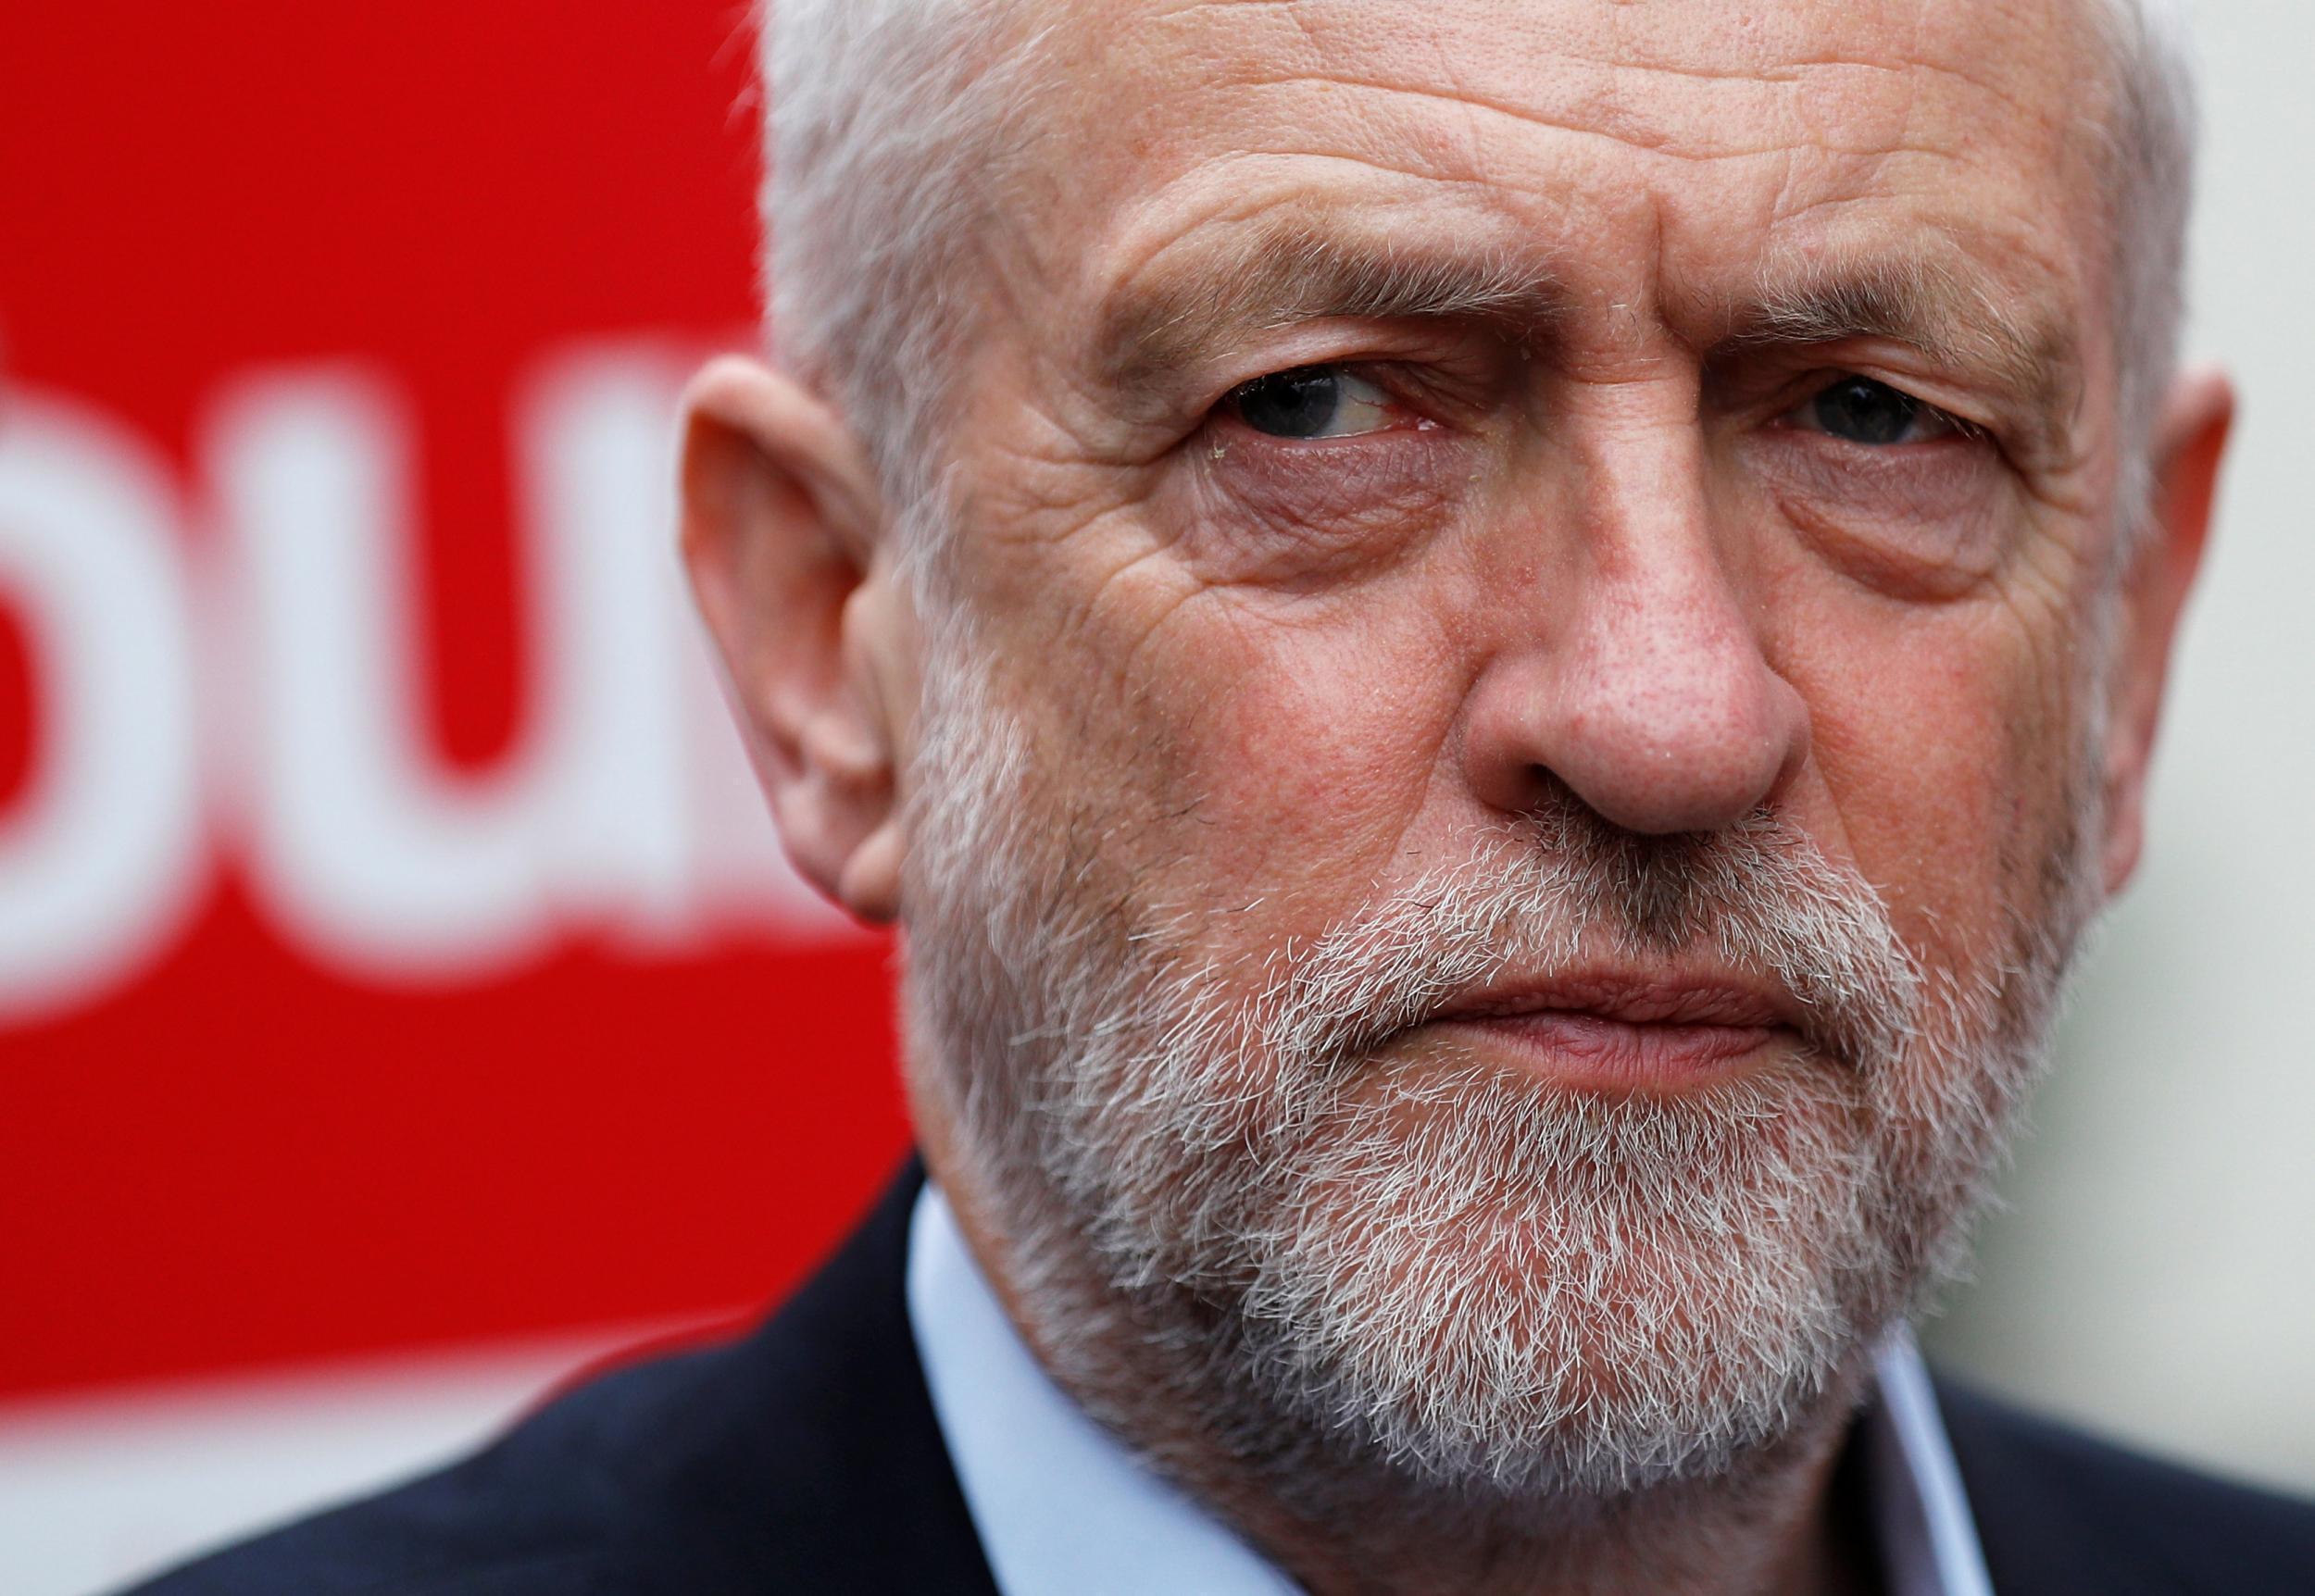 The Labour leader had earlier described Brexit as ‘settled’